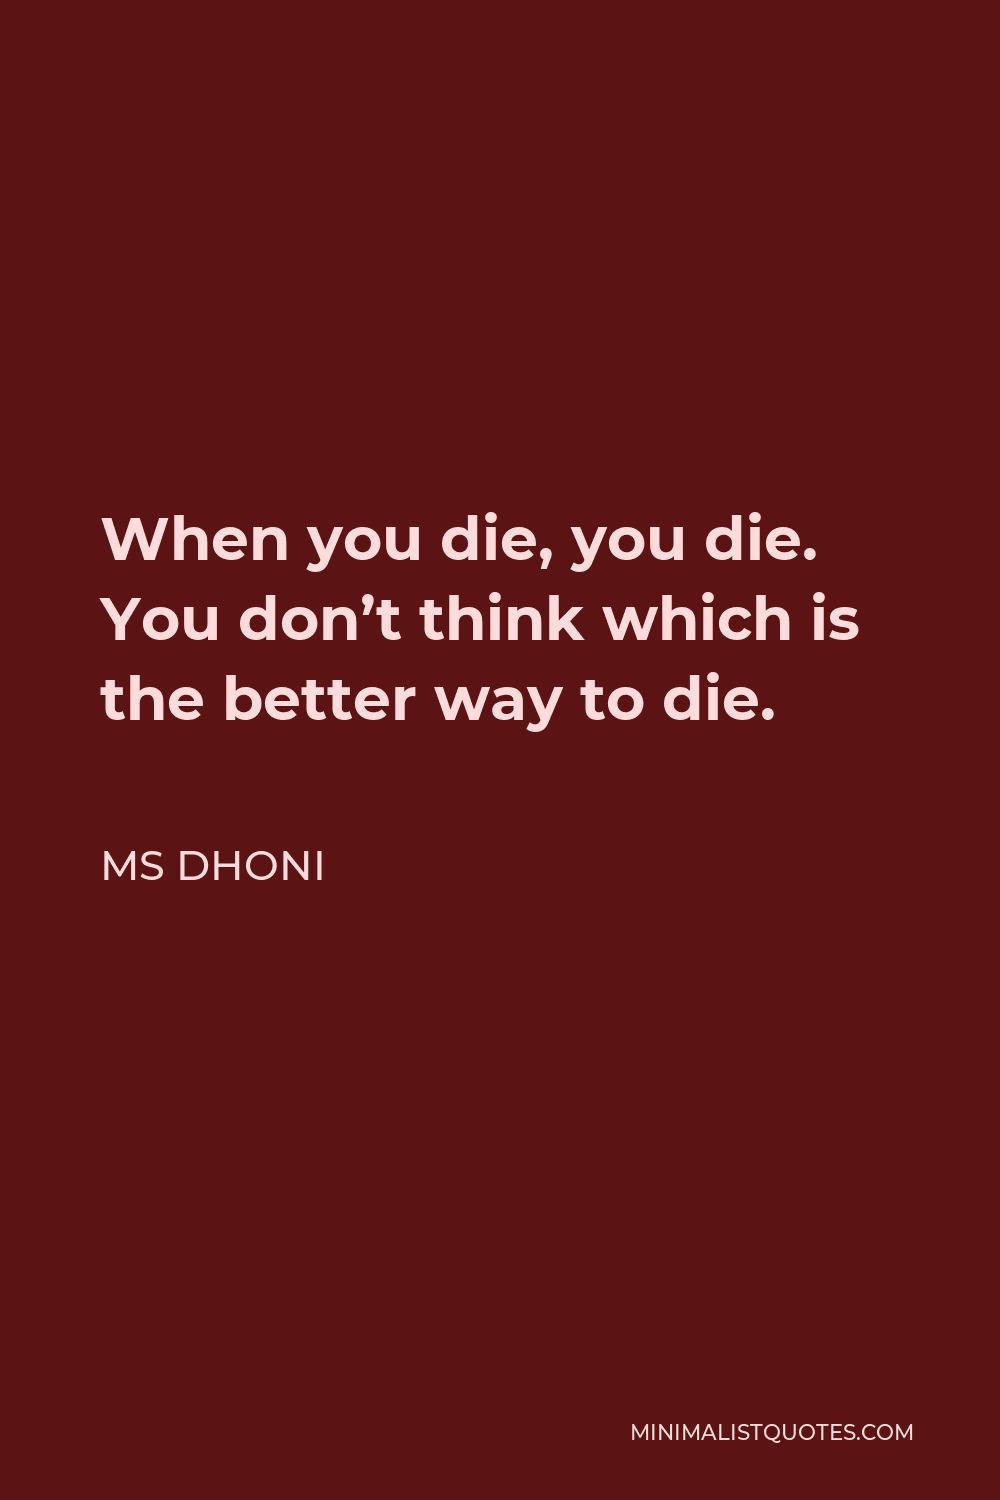 MS Dhoni Quote: When you die, you die. You don't think which is the ...